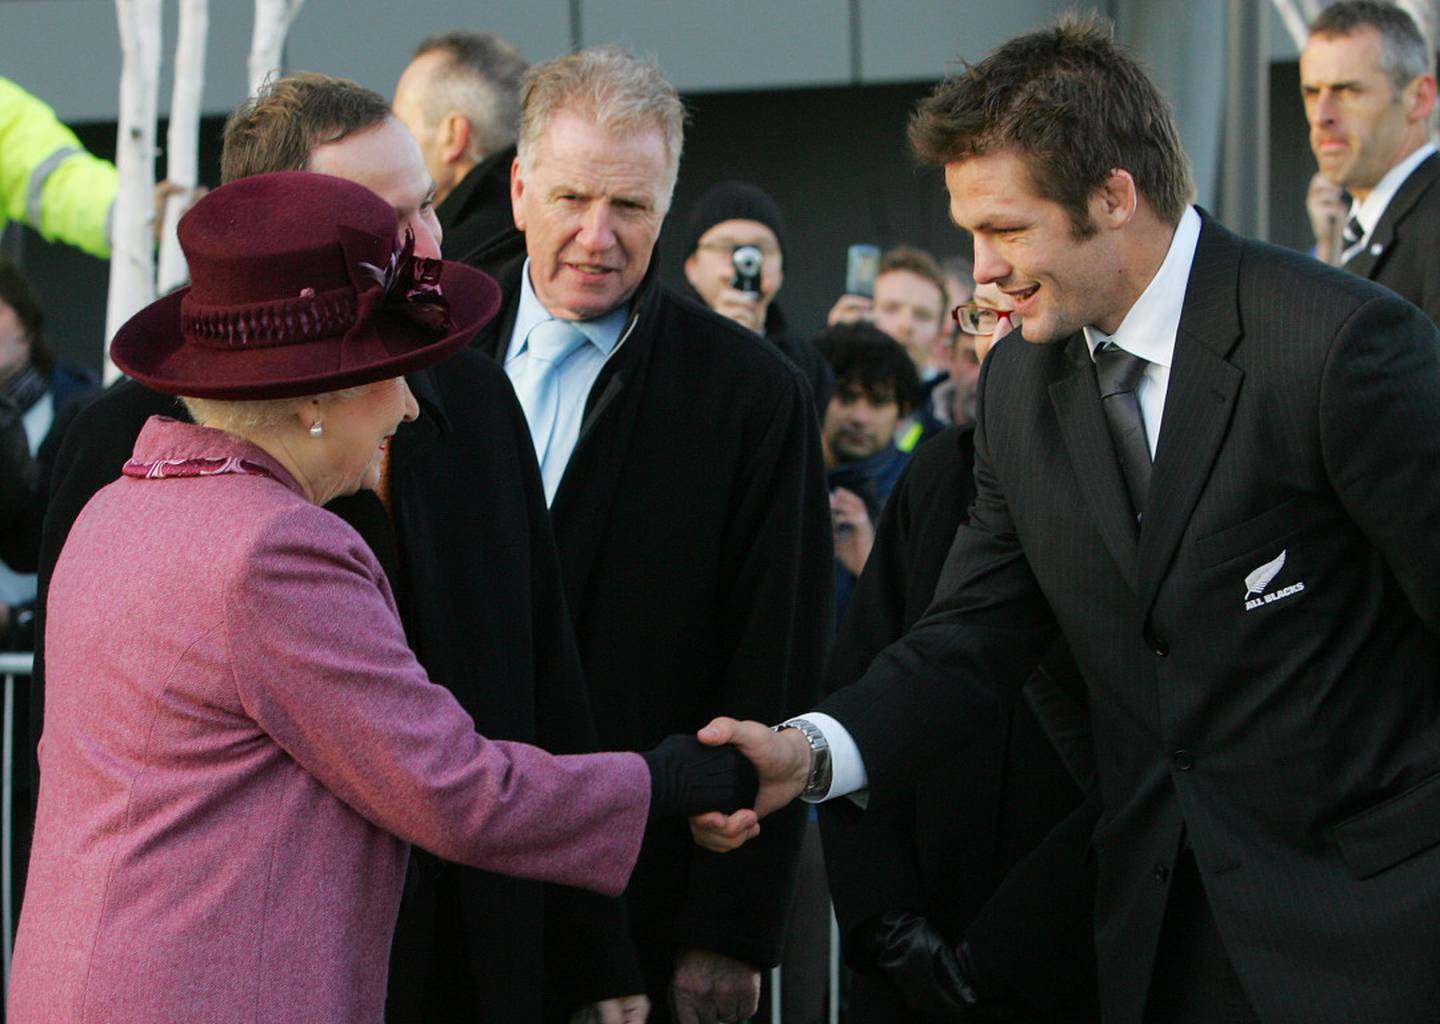 All Blacks Captain Richie McCaw shakes hands with the Queen in 2008